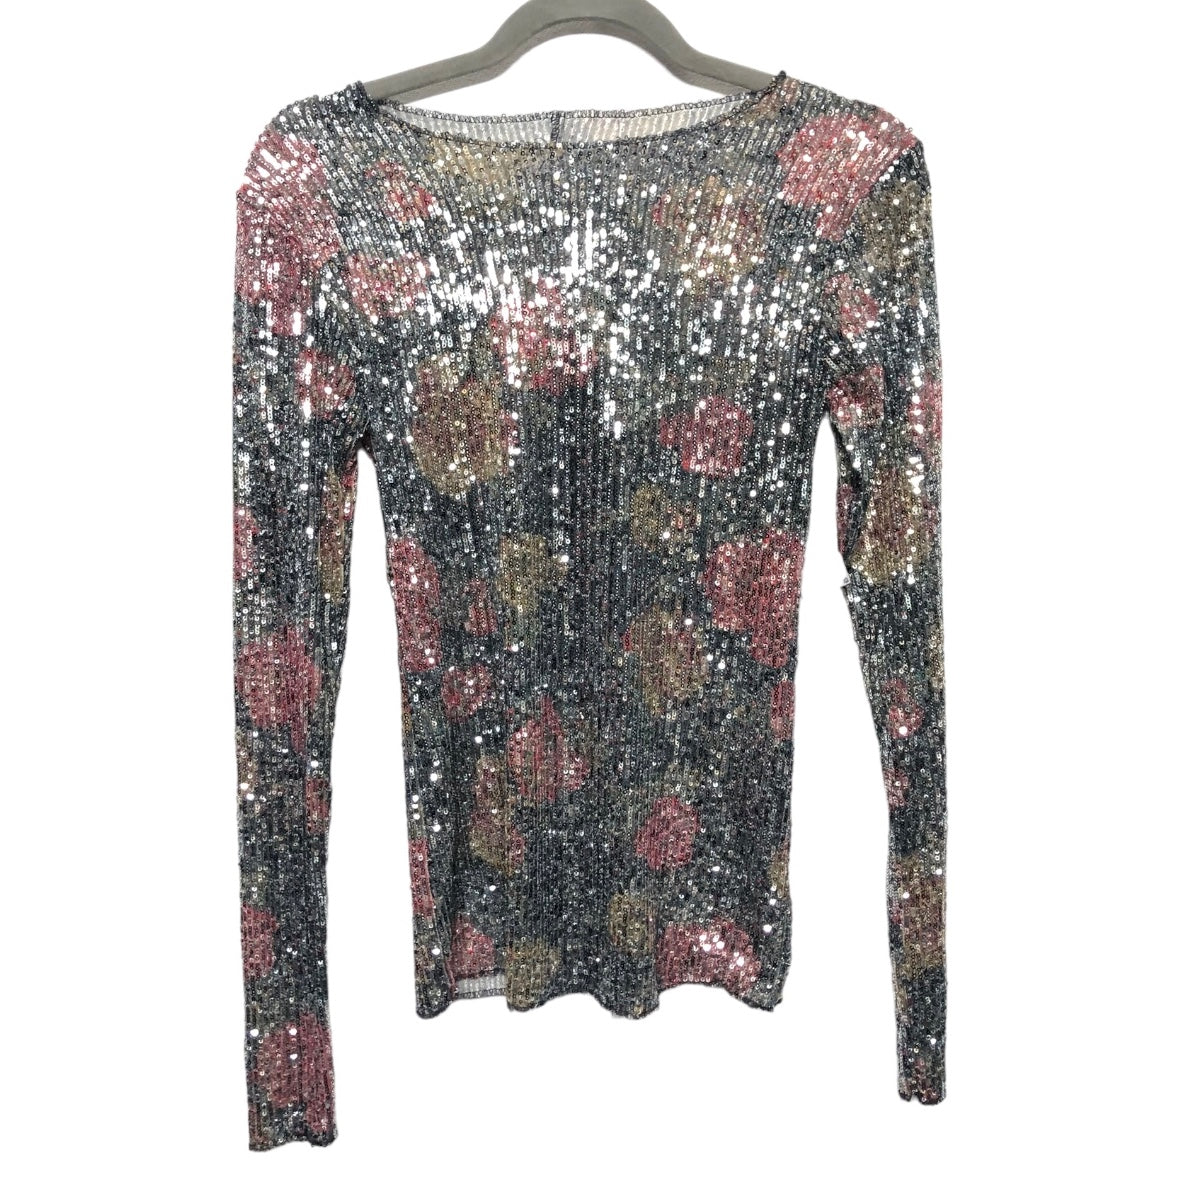 Multi-colored Top Long Sleeve Free People, Size Xs